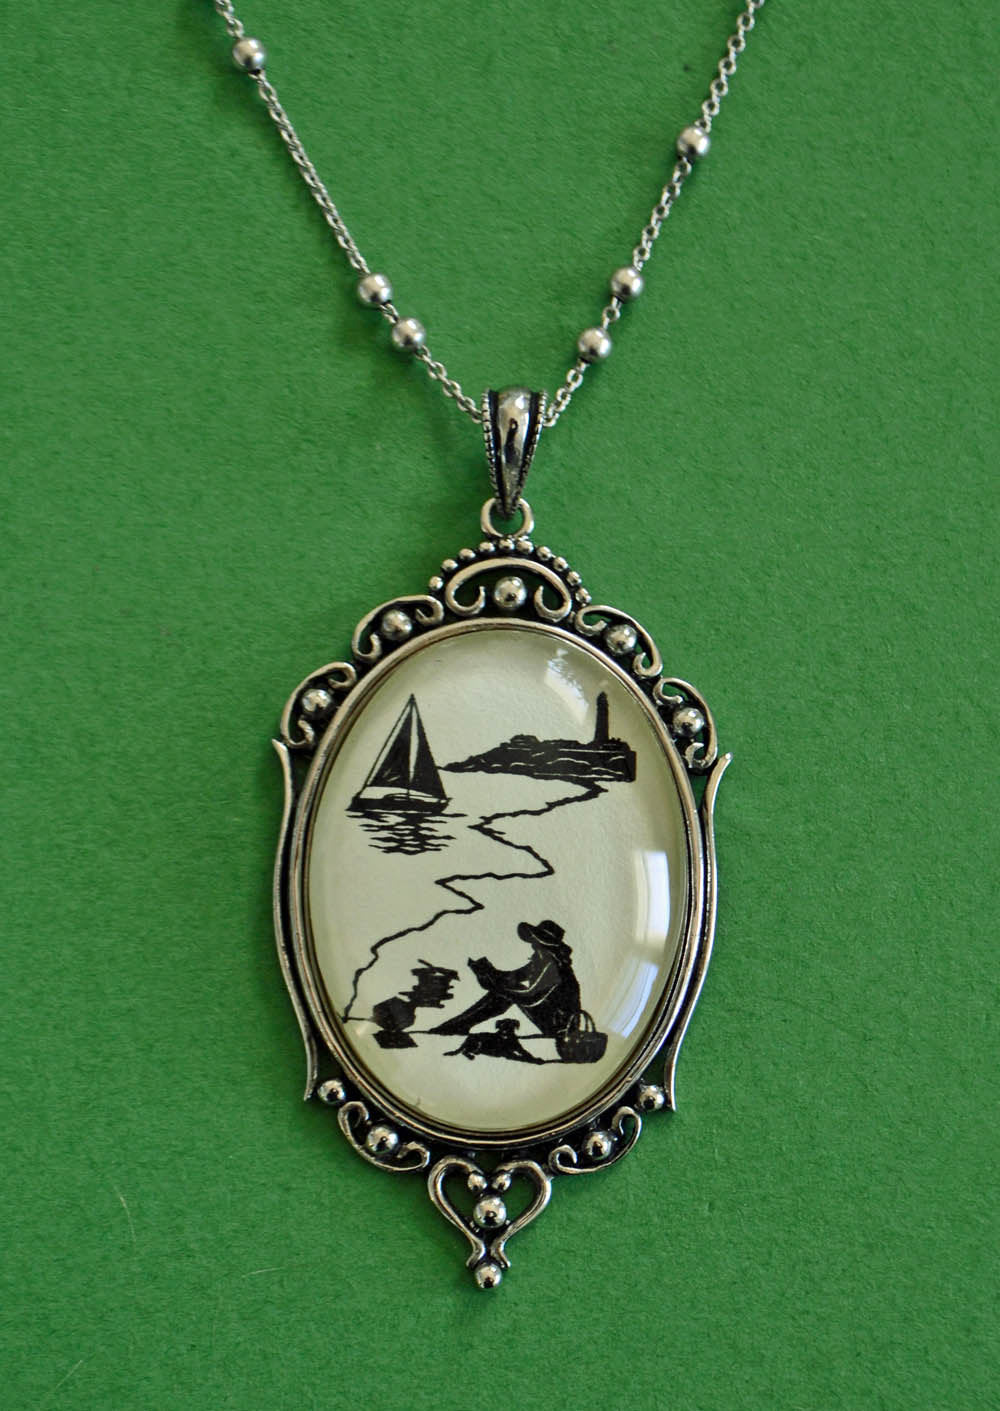 AFTERNOON READING on the BEACH Necklace, pendant on chain - Silhouette Jewelry